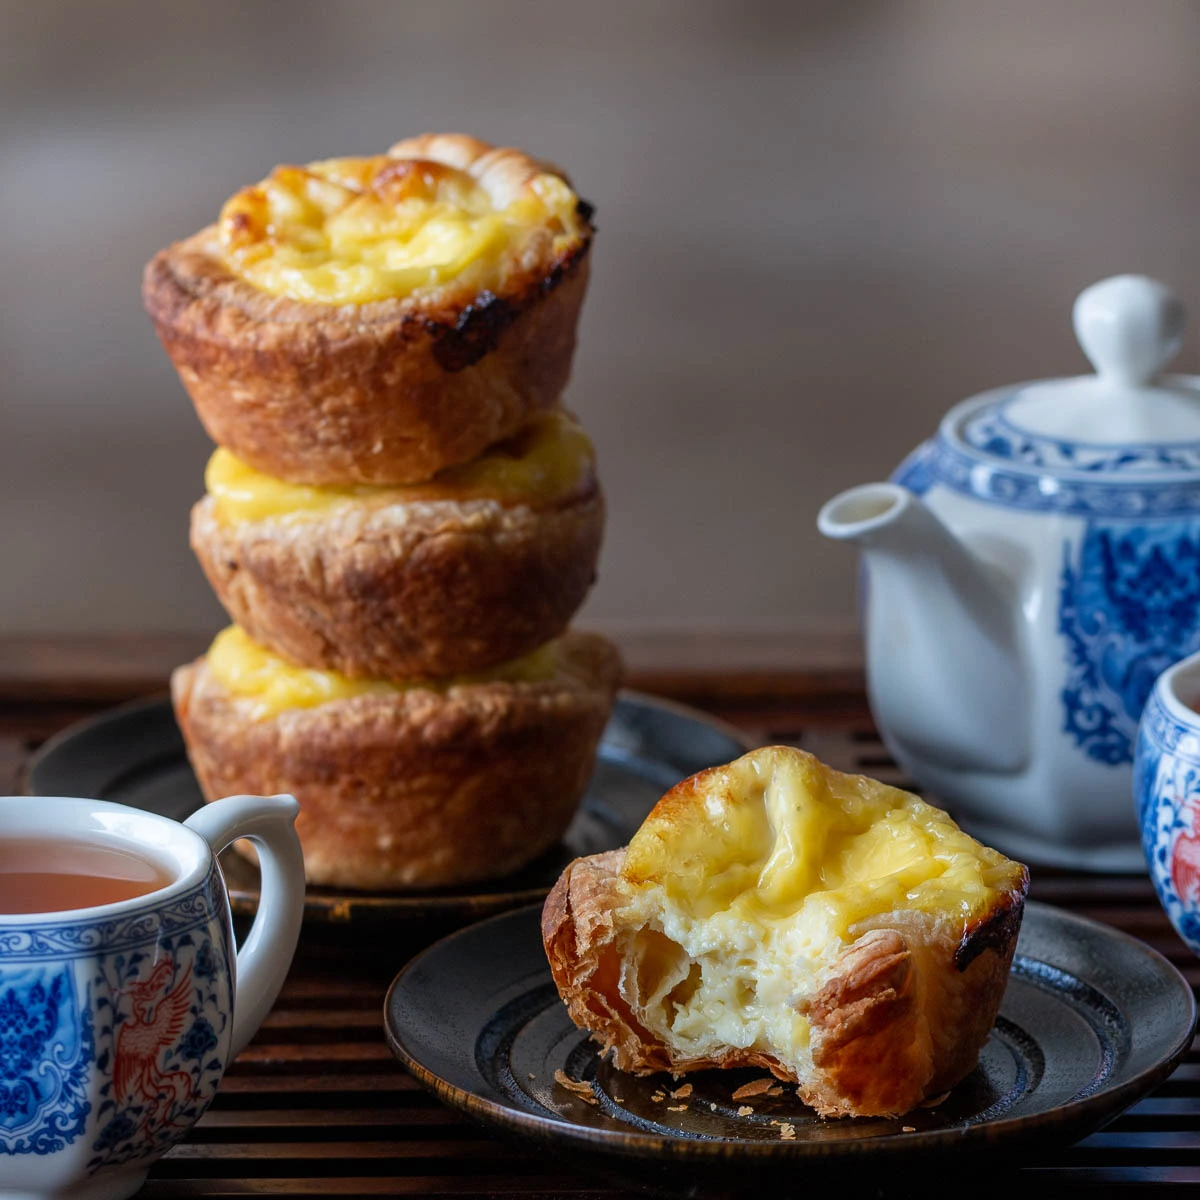 Egg tarts served on a black plate with a teapot and a cup of tea